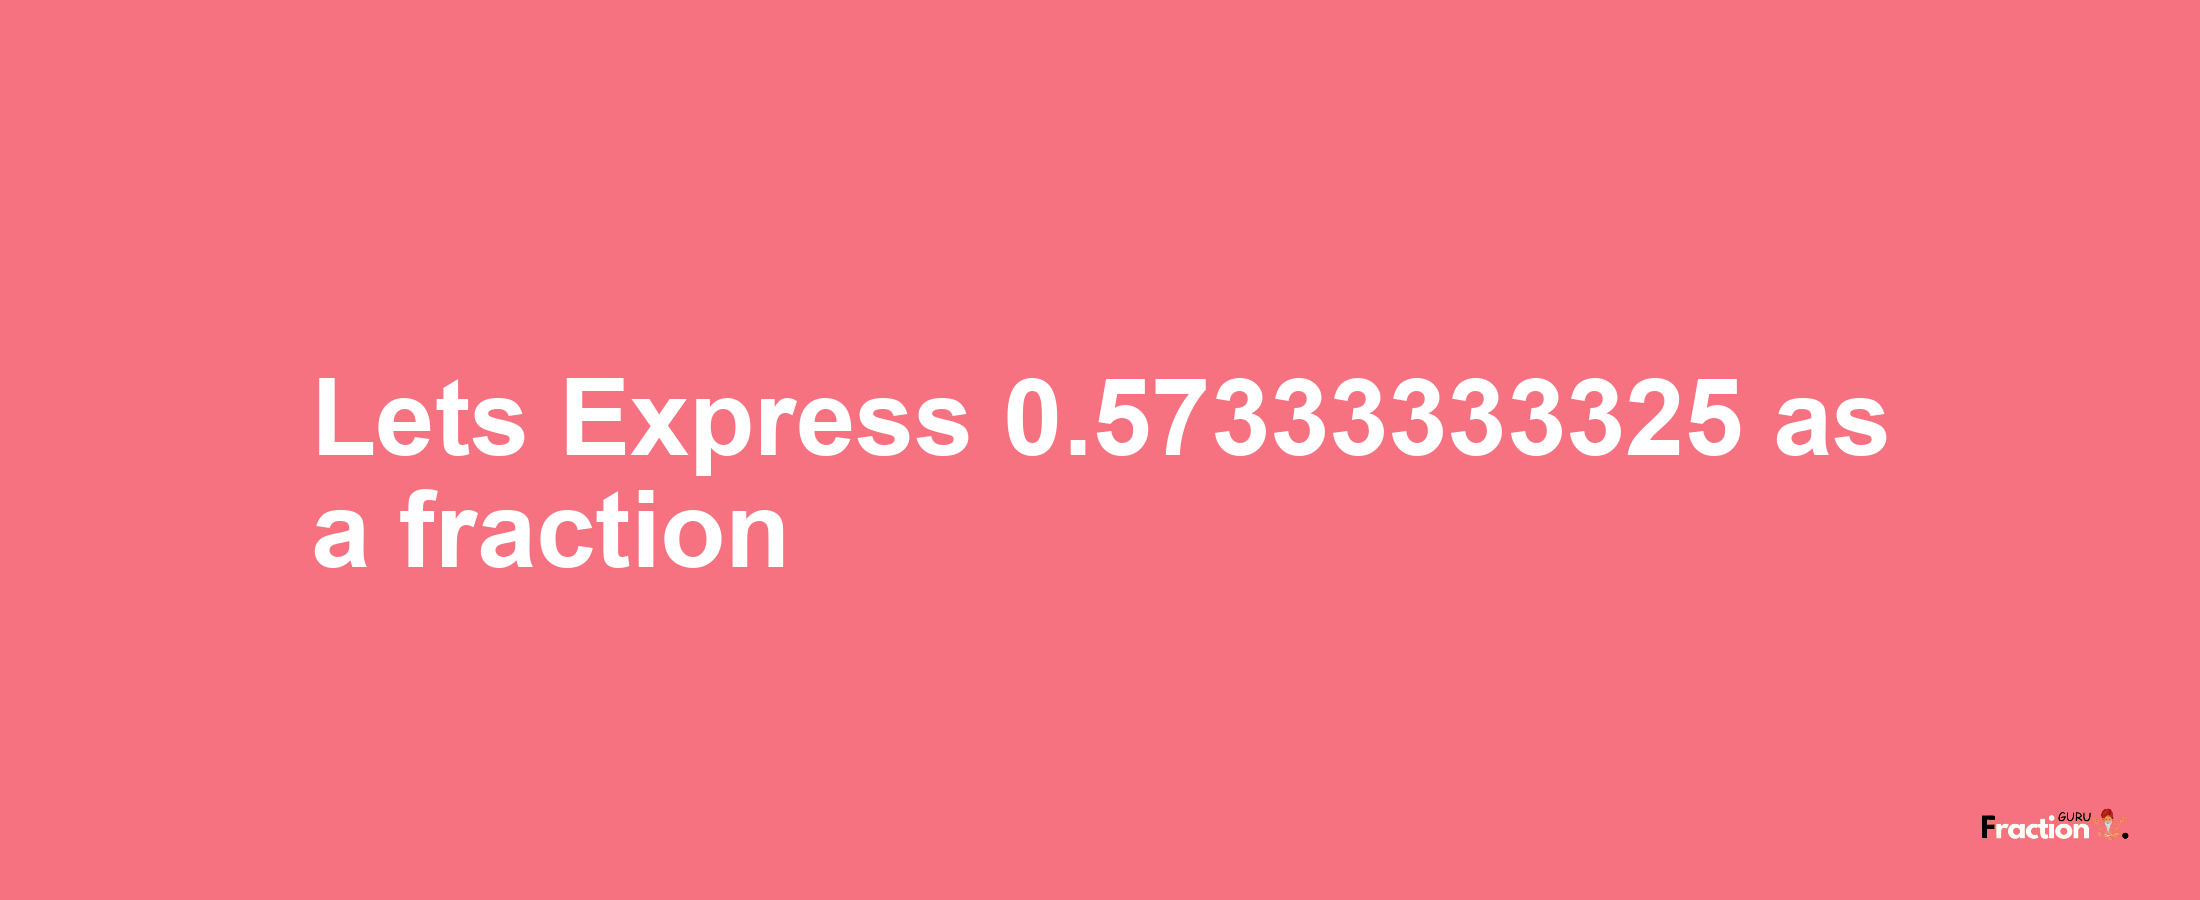 Lets Express 0.57333333325 as afraction